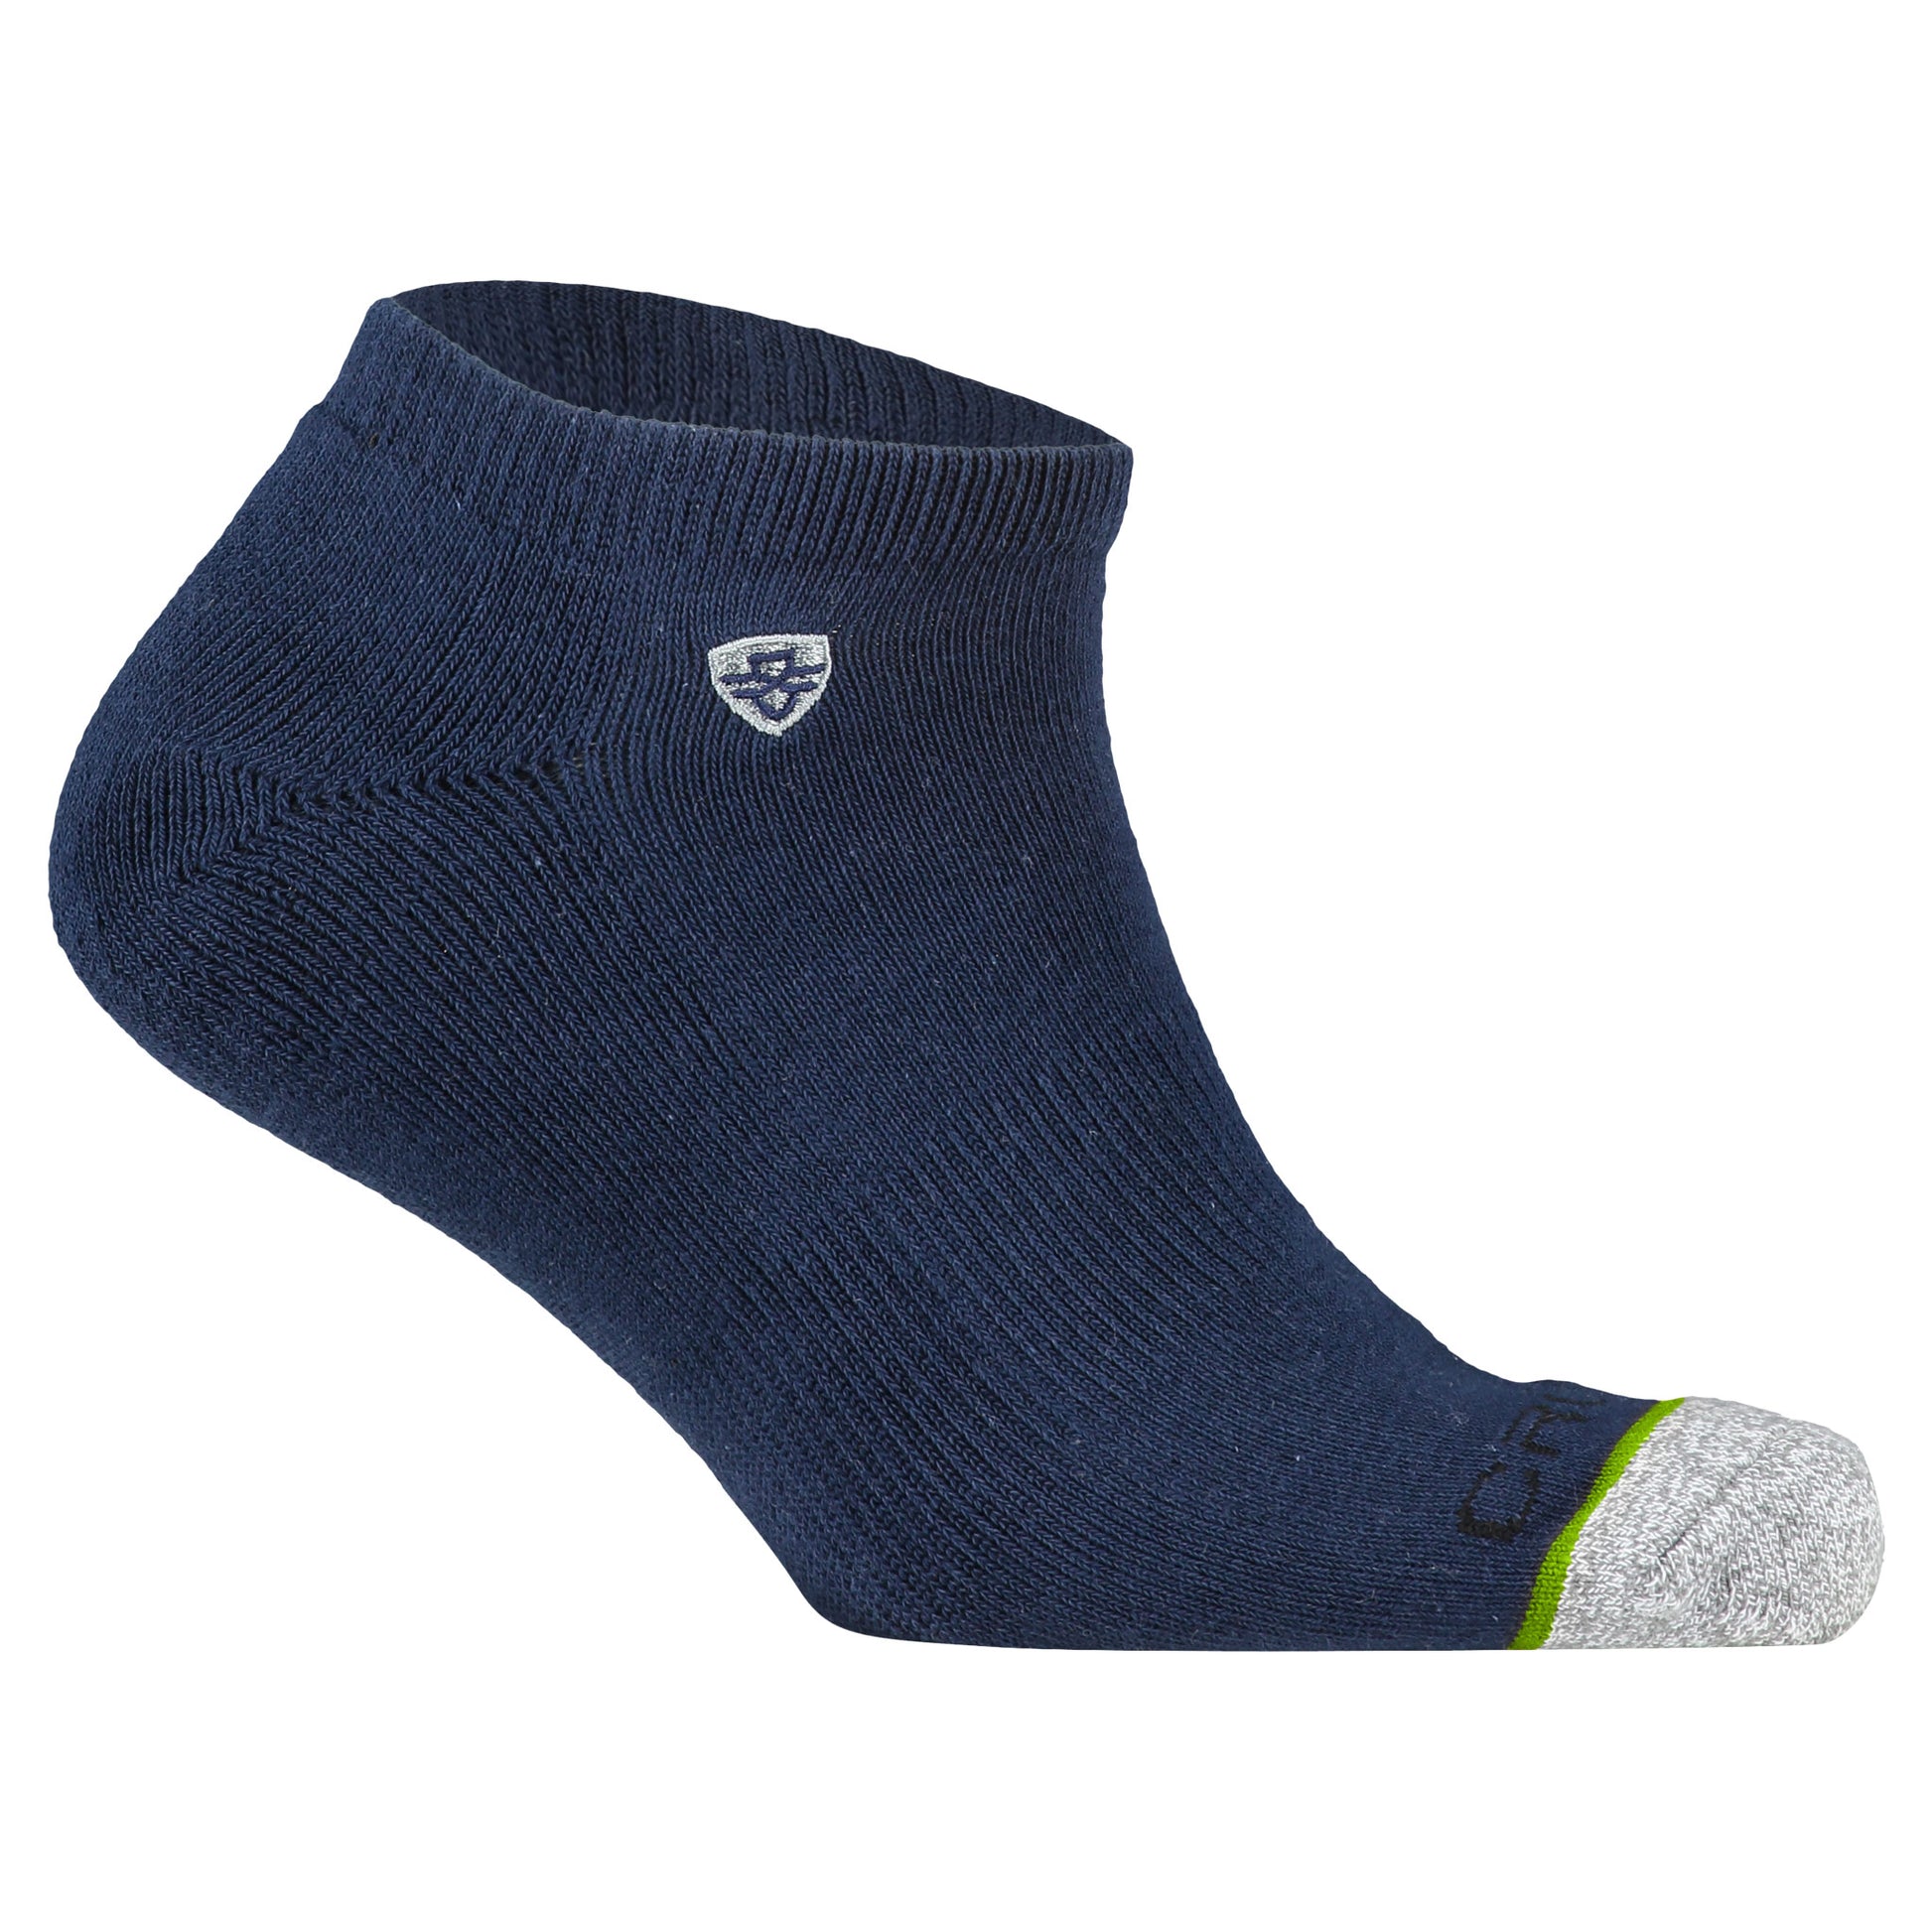 Crossfly men's Original Low Socks in navy from the Everyday series, featuring Flat Toe Seams and 360 Hold.